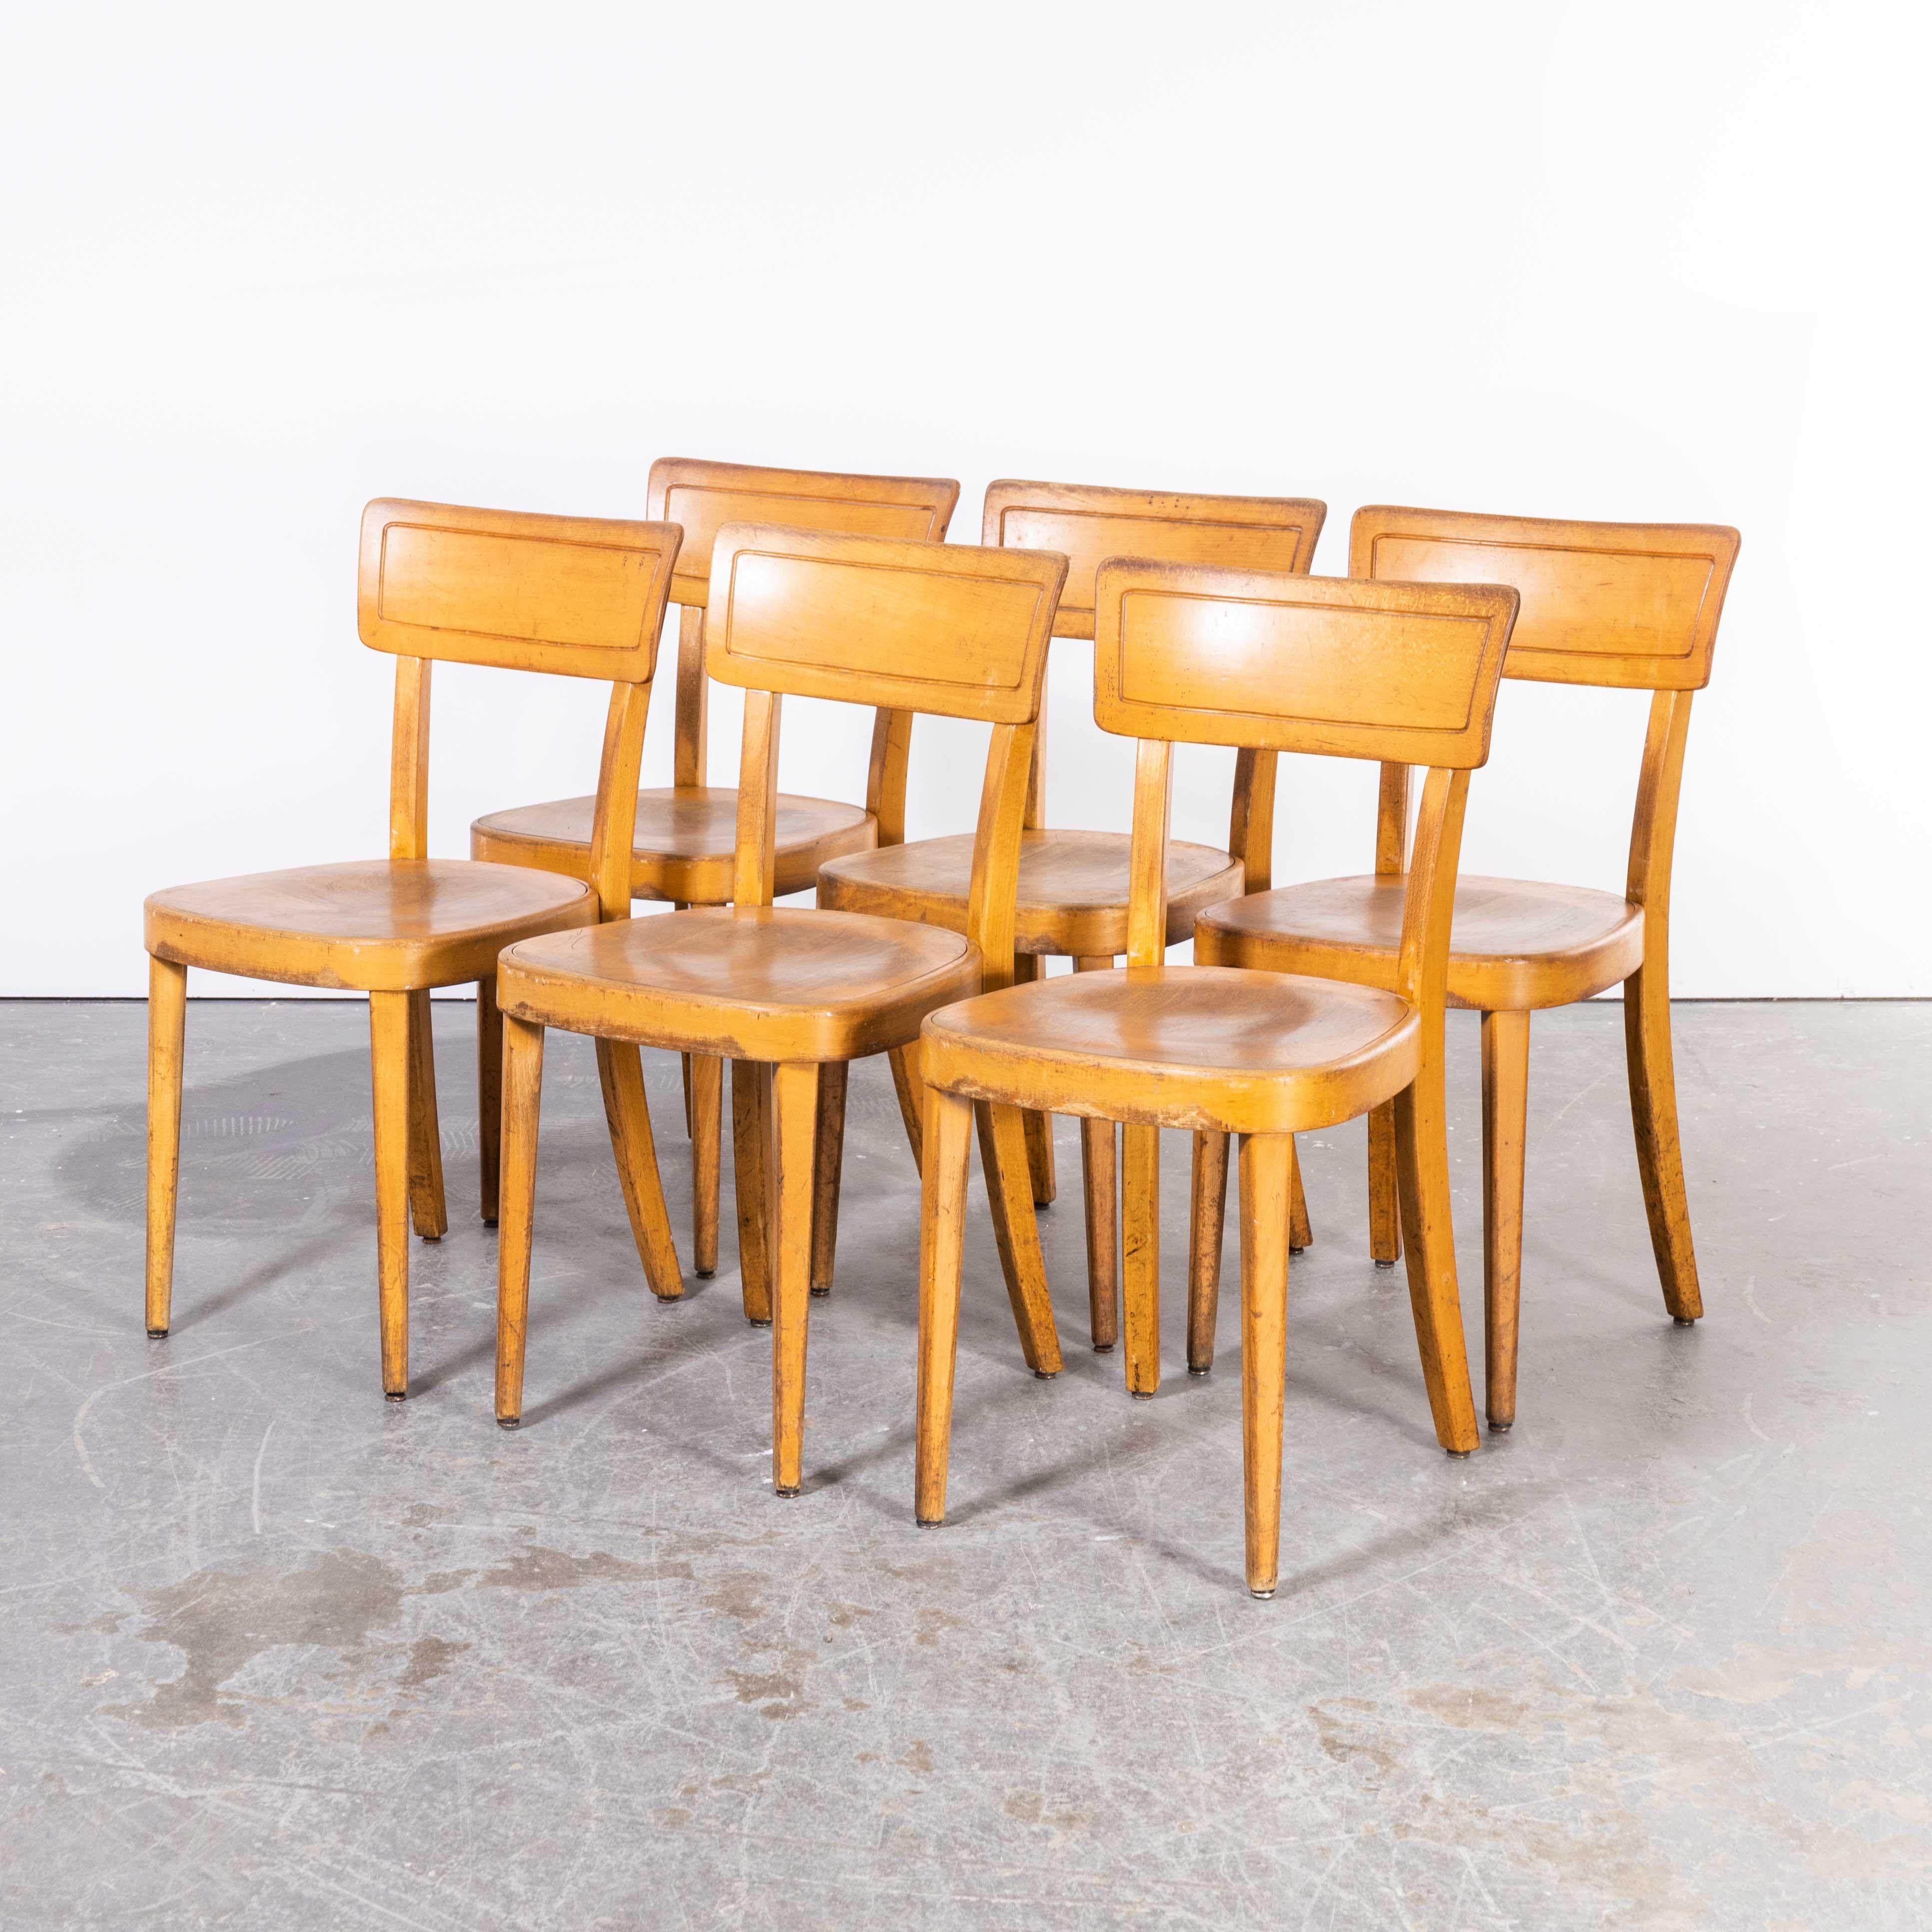 Mid-20th Century 1960's Horgen Glarus Beech Saddle Back Dining Chairs - Set of Six For Sale